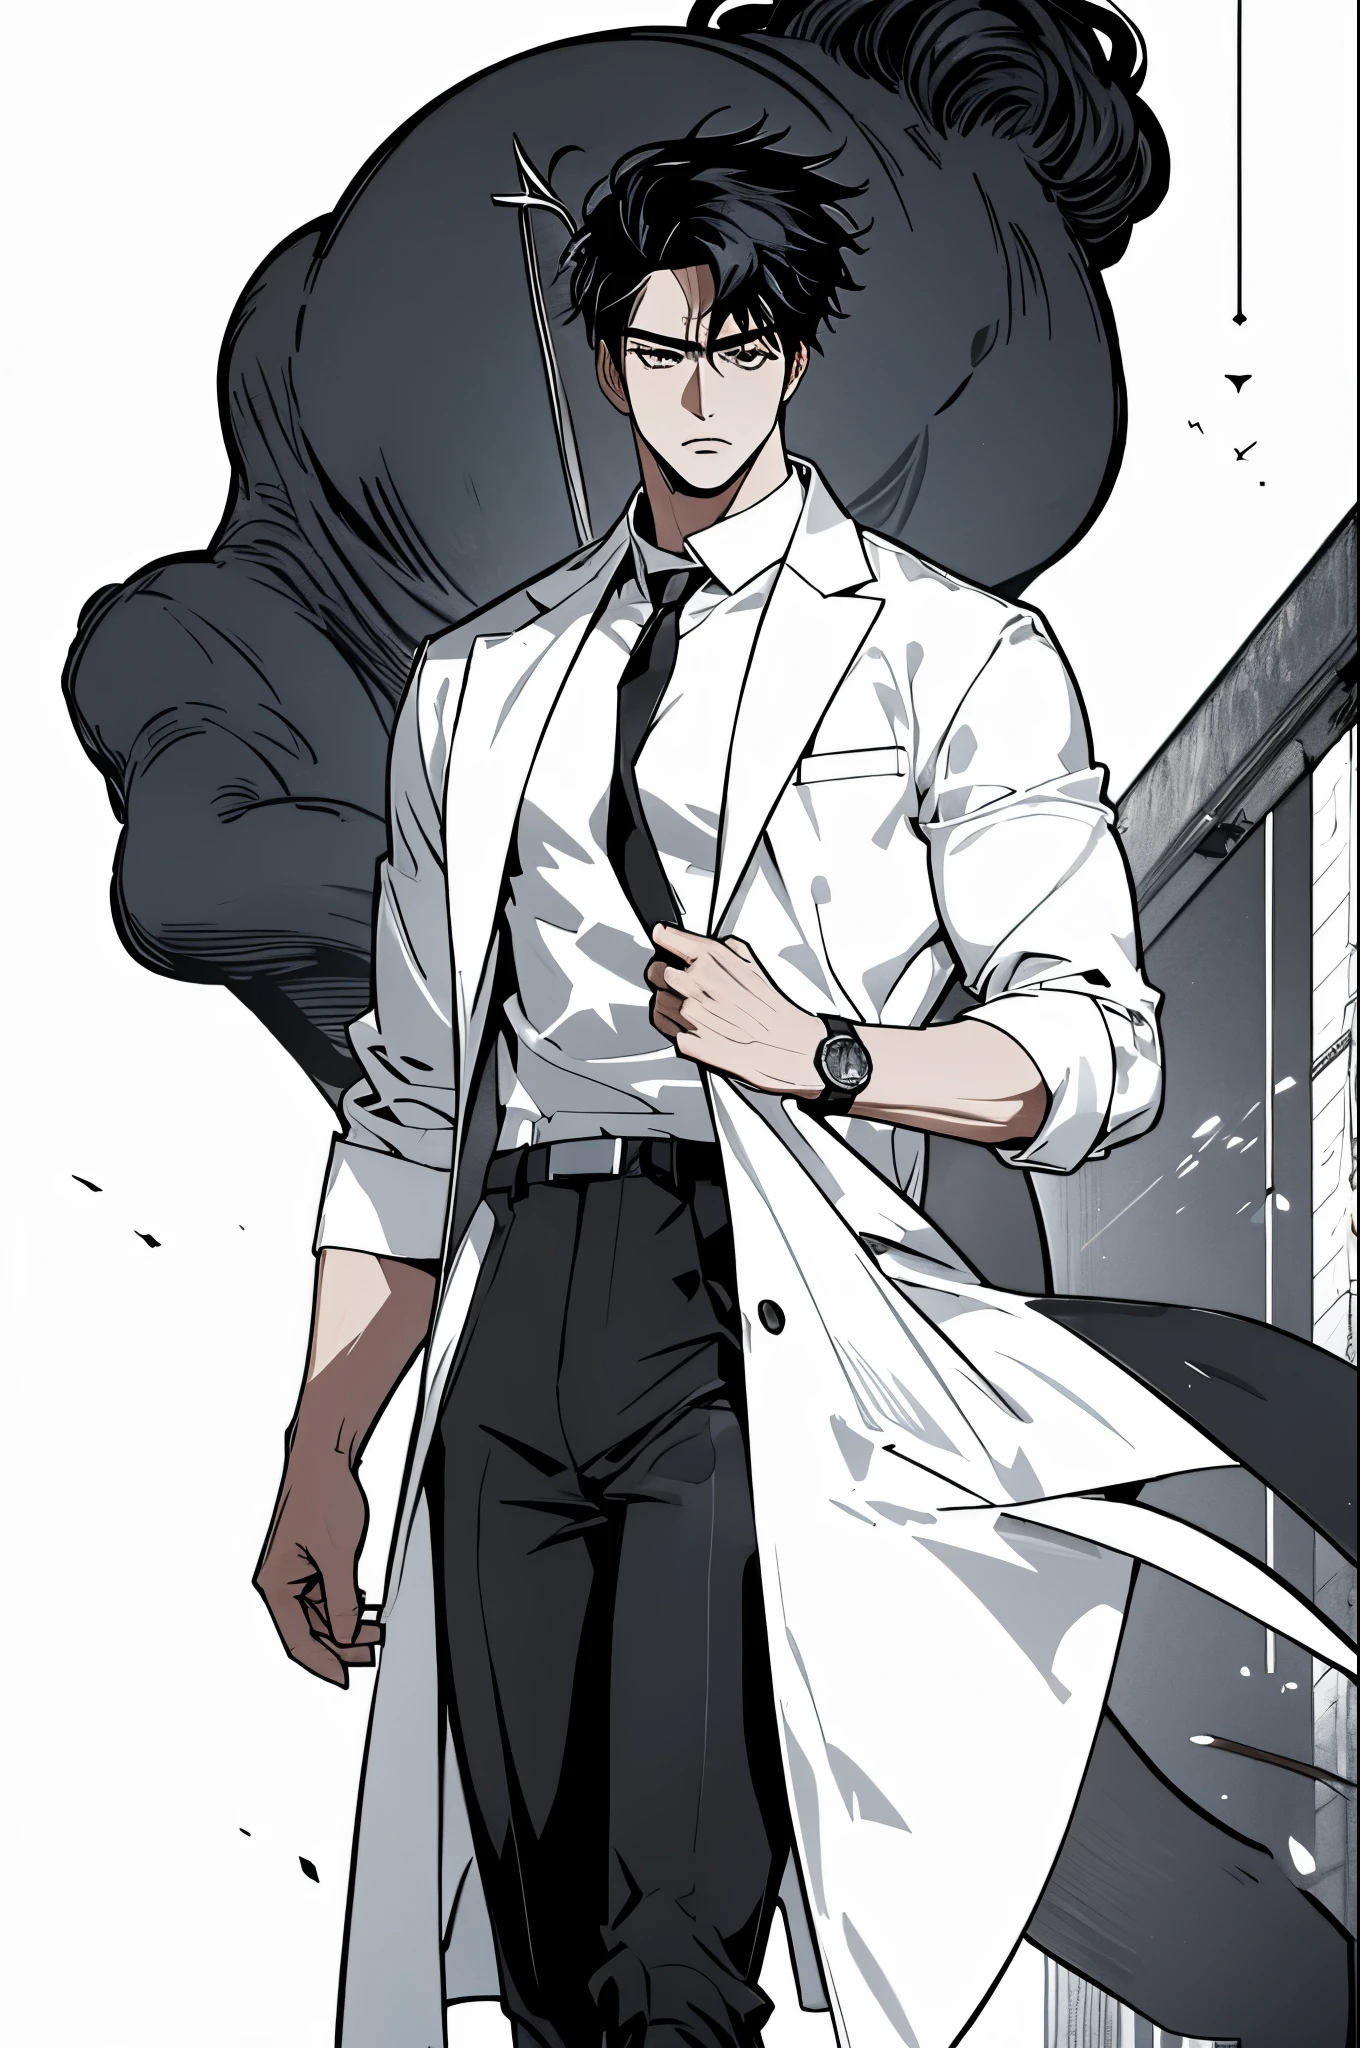 masterpiece, ultra detailed, 4K, 8K, 32K, intricate, (((1boy))), ((black hair)), ((no background)), white background, detailed eyes, white shirt and black pants, , handsome young man, 20 year old, (((same character))), dynamic pose, anatomically correct hands, modern clothing, detailed clothes, (slender body), Hideaki Sorachi, Bleach, Tite Kubo, Kazuki Yone, (((stylish haircut)))